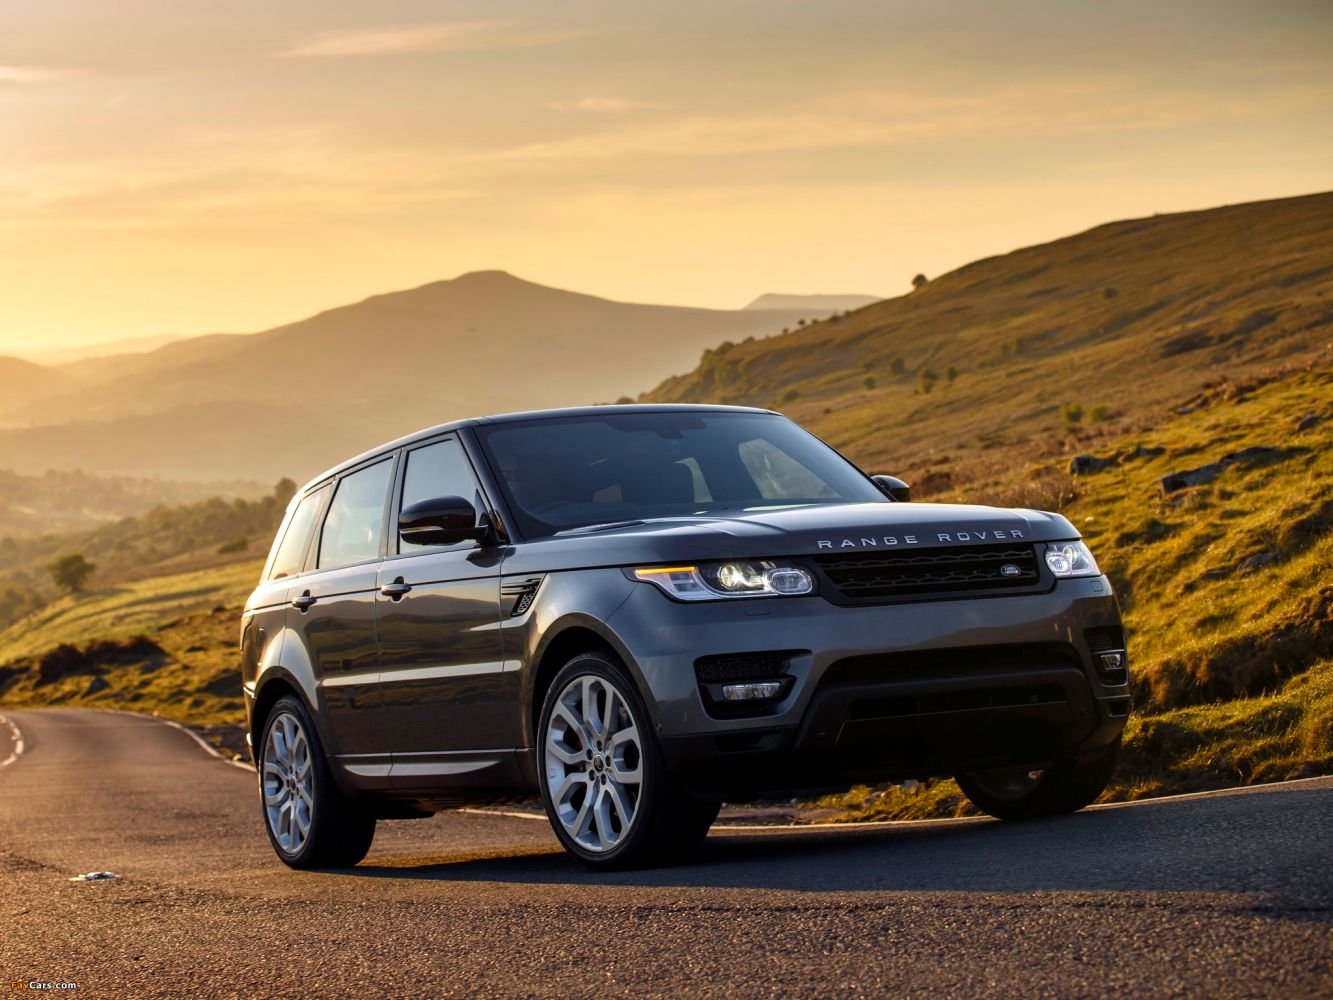 <p>In 2005, Land Rover introduced its first Range Rover variant, the Range Rover Sport. Initially based on a modified version of the smaller Land Rover Discovery platform, the Range Rover Sport adapted styling cues from the full-size Range Rover to a smaller, nimbler platform. In 2011, Land Rover added another model with the Range Rover Evoque, a subcompact crossover SUV that, at one point, was available in three-door, five-door, and convertible variants. In 2017, Land Rover introduced a fourth Range Rover variant, the sleek and aerodynamic Range Rover Velar.</p>